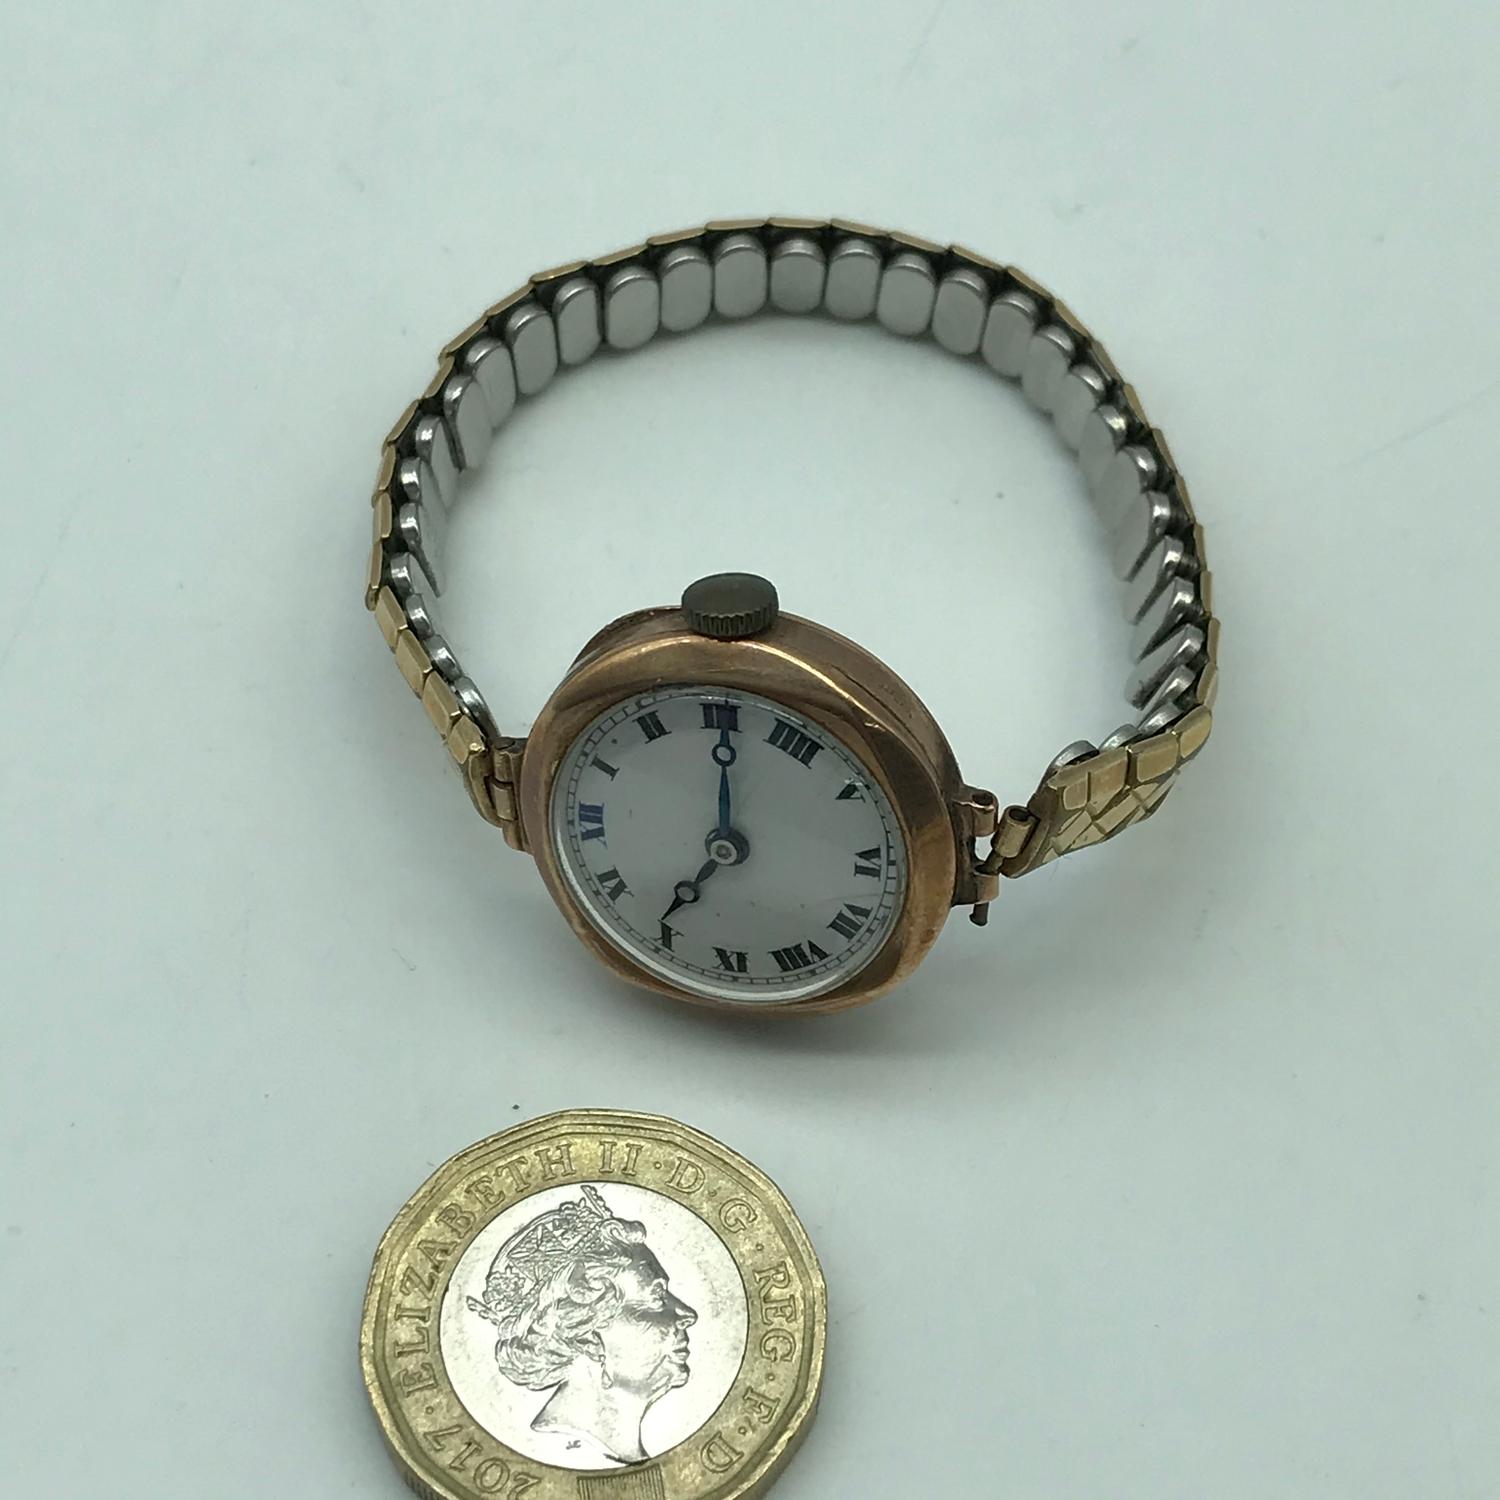 A 9ct gold ladies cased watch with plated bracelet. In a working condition